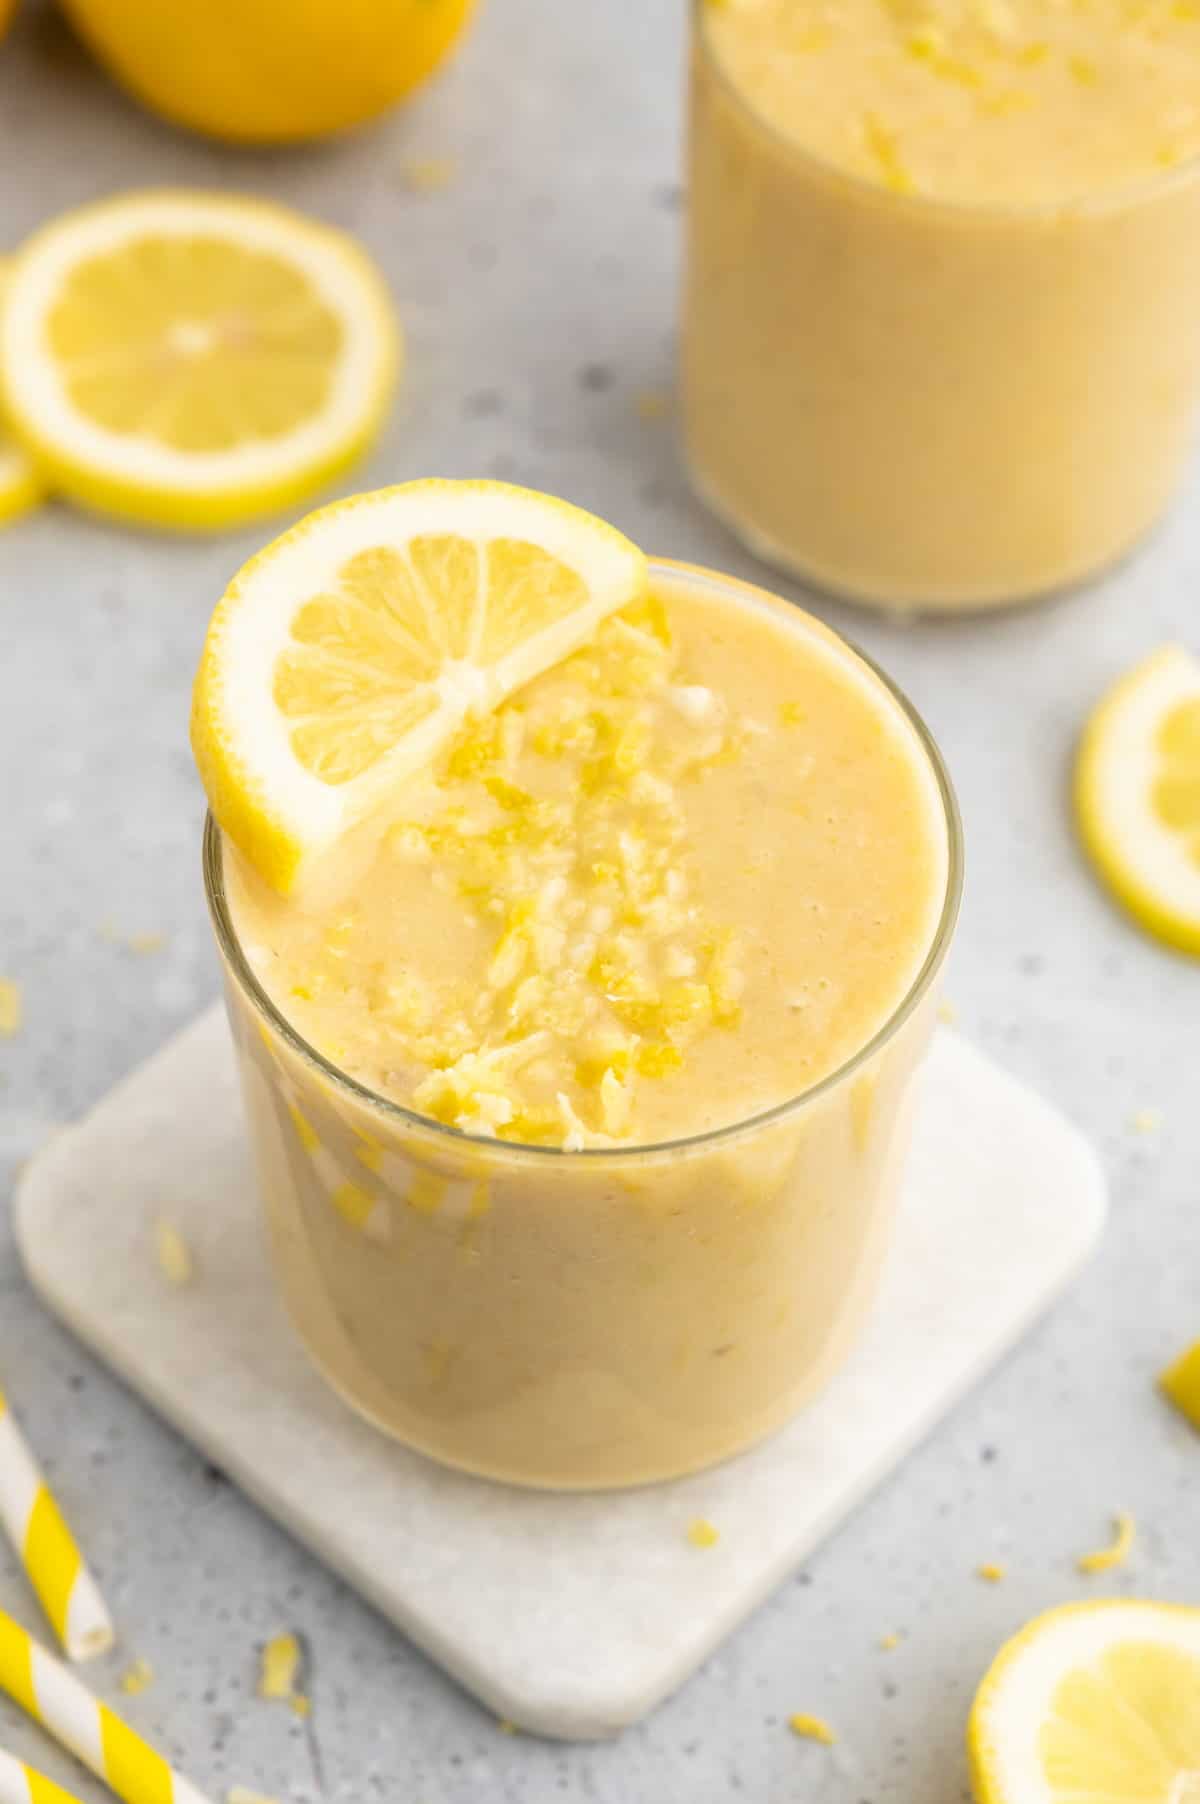 Lemon smoothie in a glass topped with a lemon slice and zest.